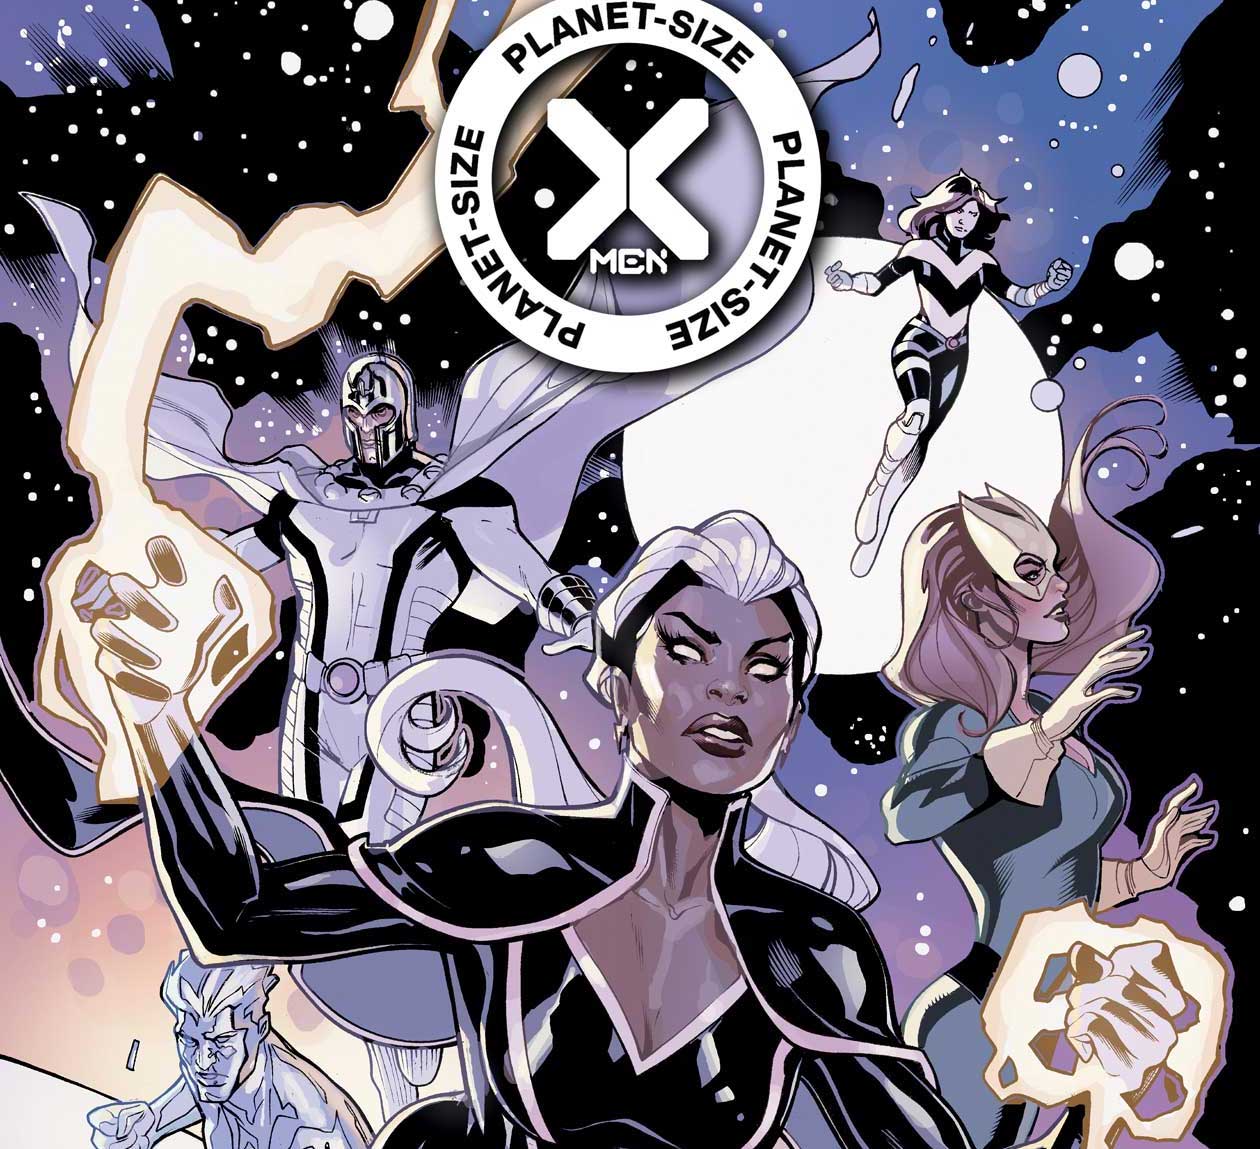 Marvel reveals Omega-Level mutant variant covers and interior art for 'Planet-Size X-Men'